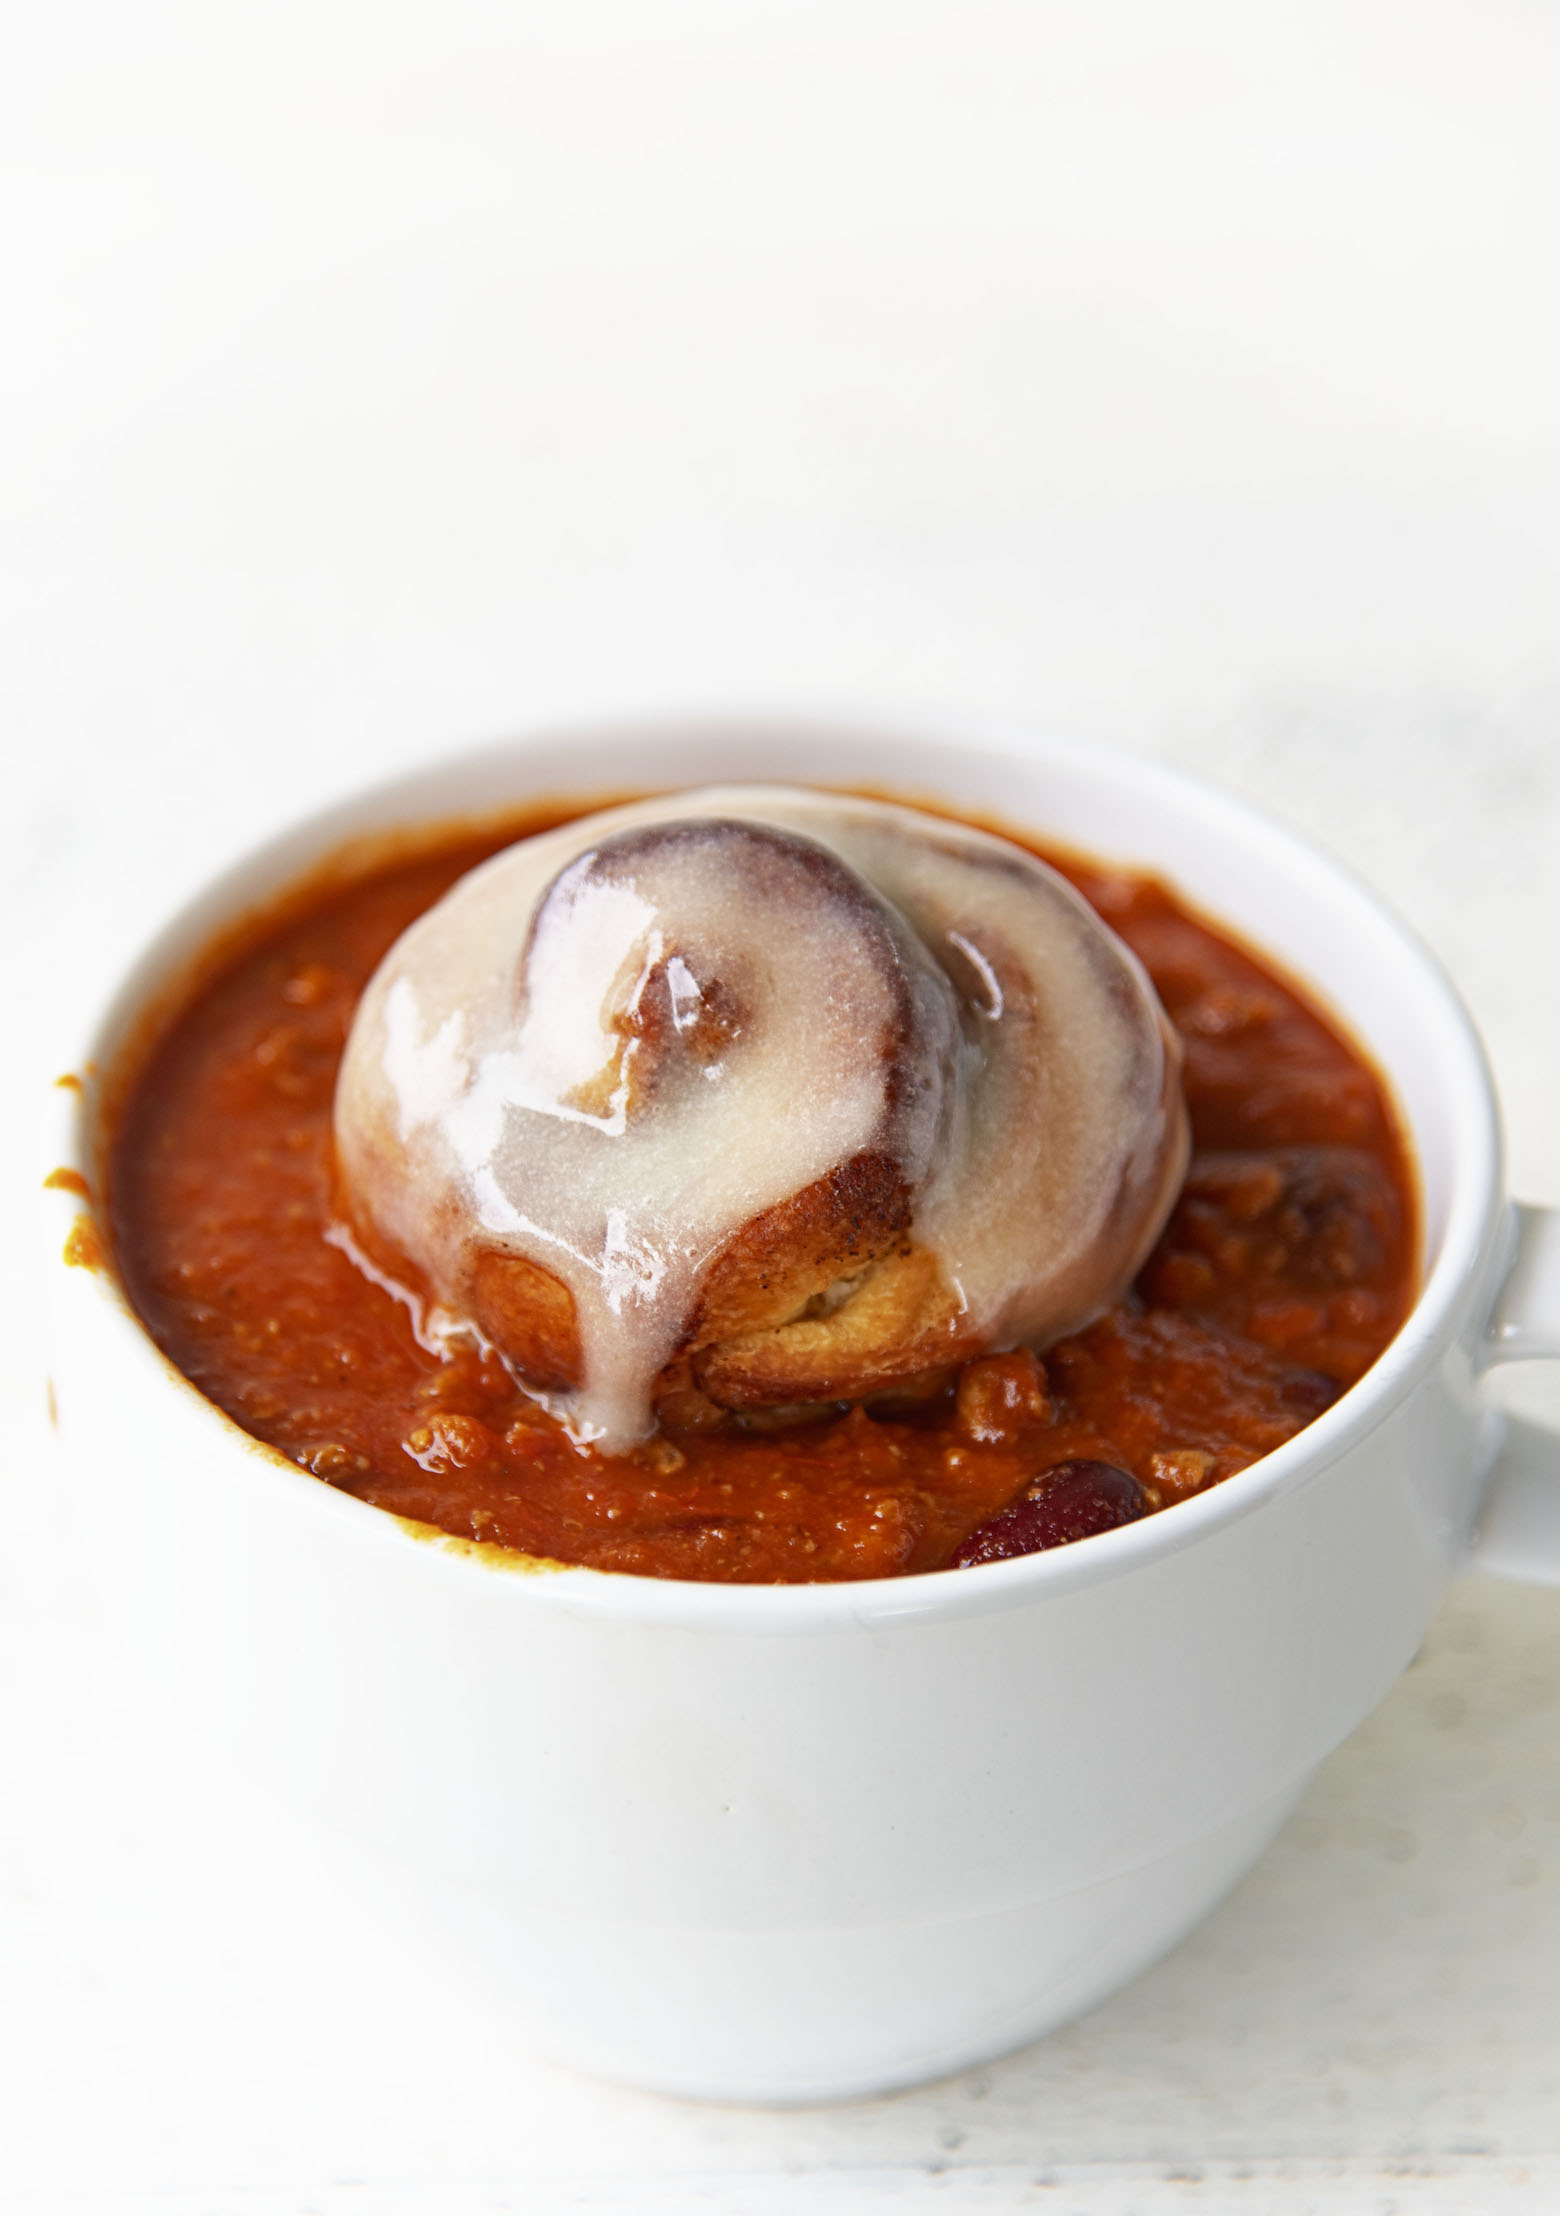 Cinnamon roll sitting in a bowl of chili. 